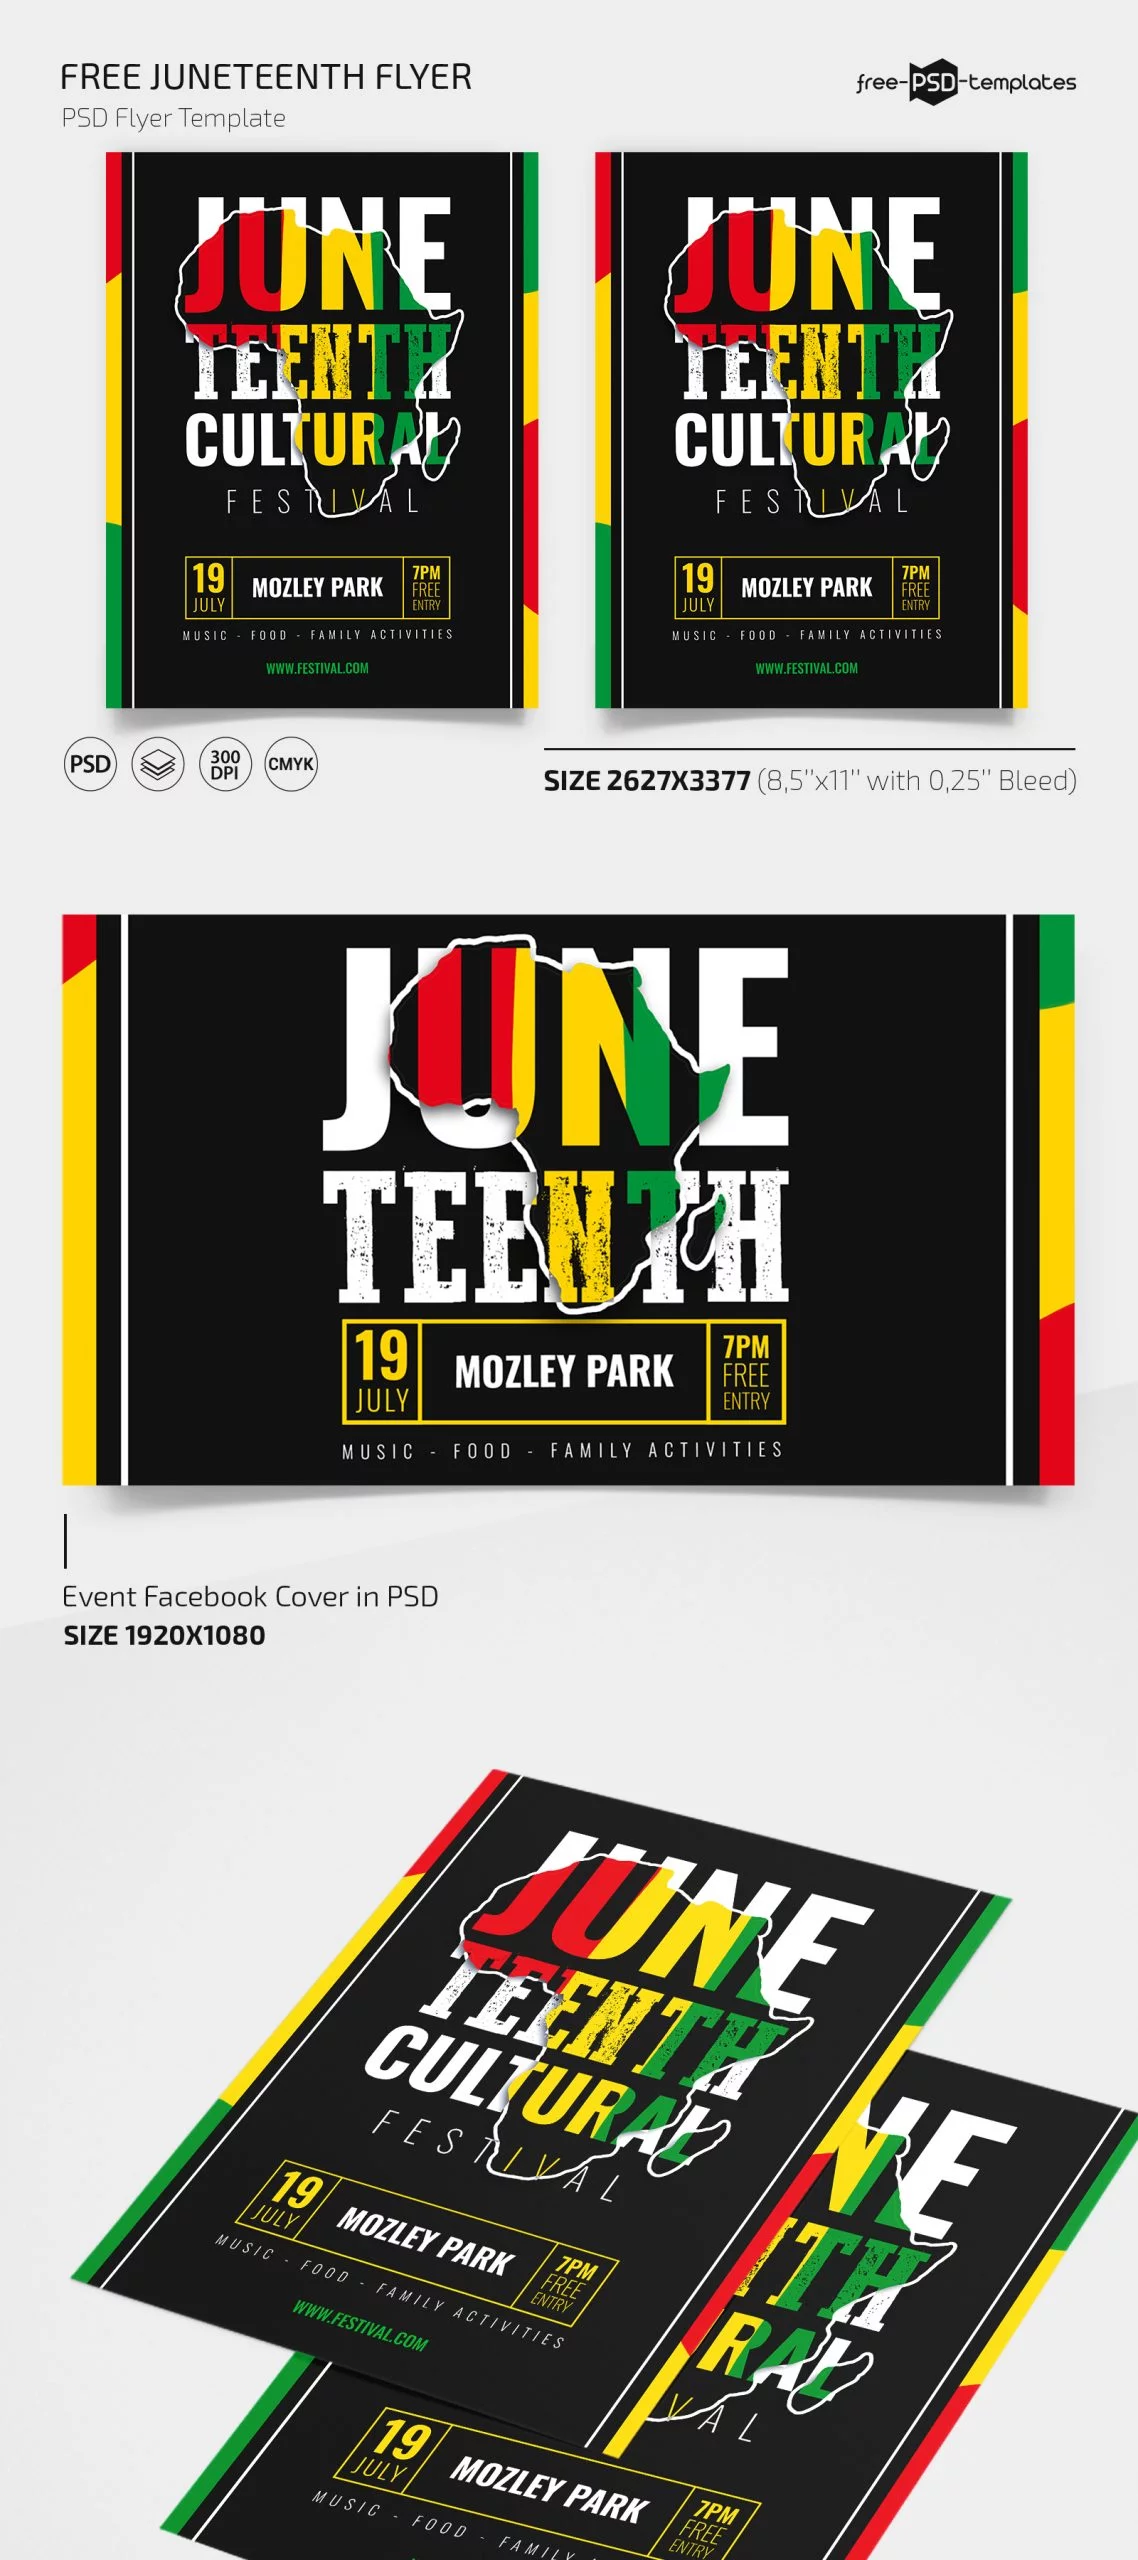 Free Juneteenth Flyer Template in PSD